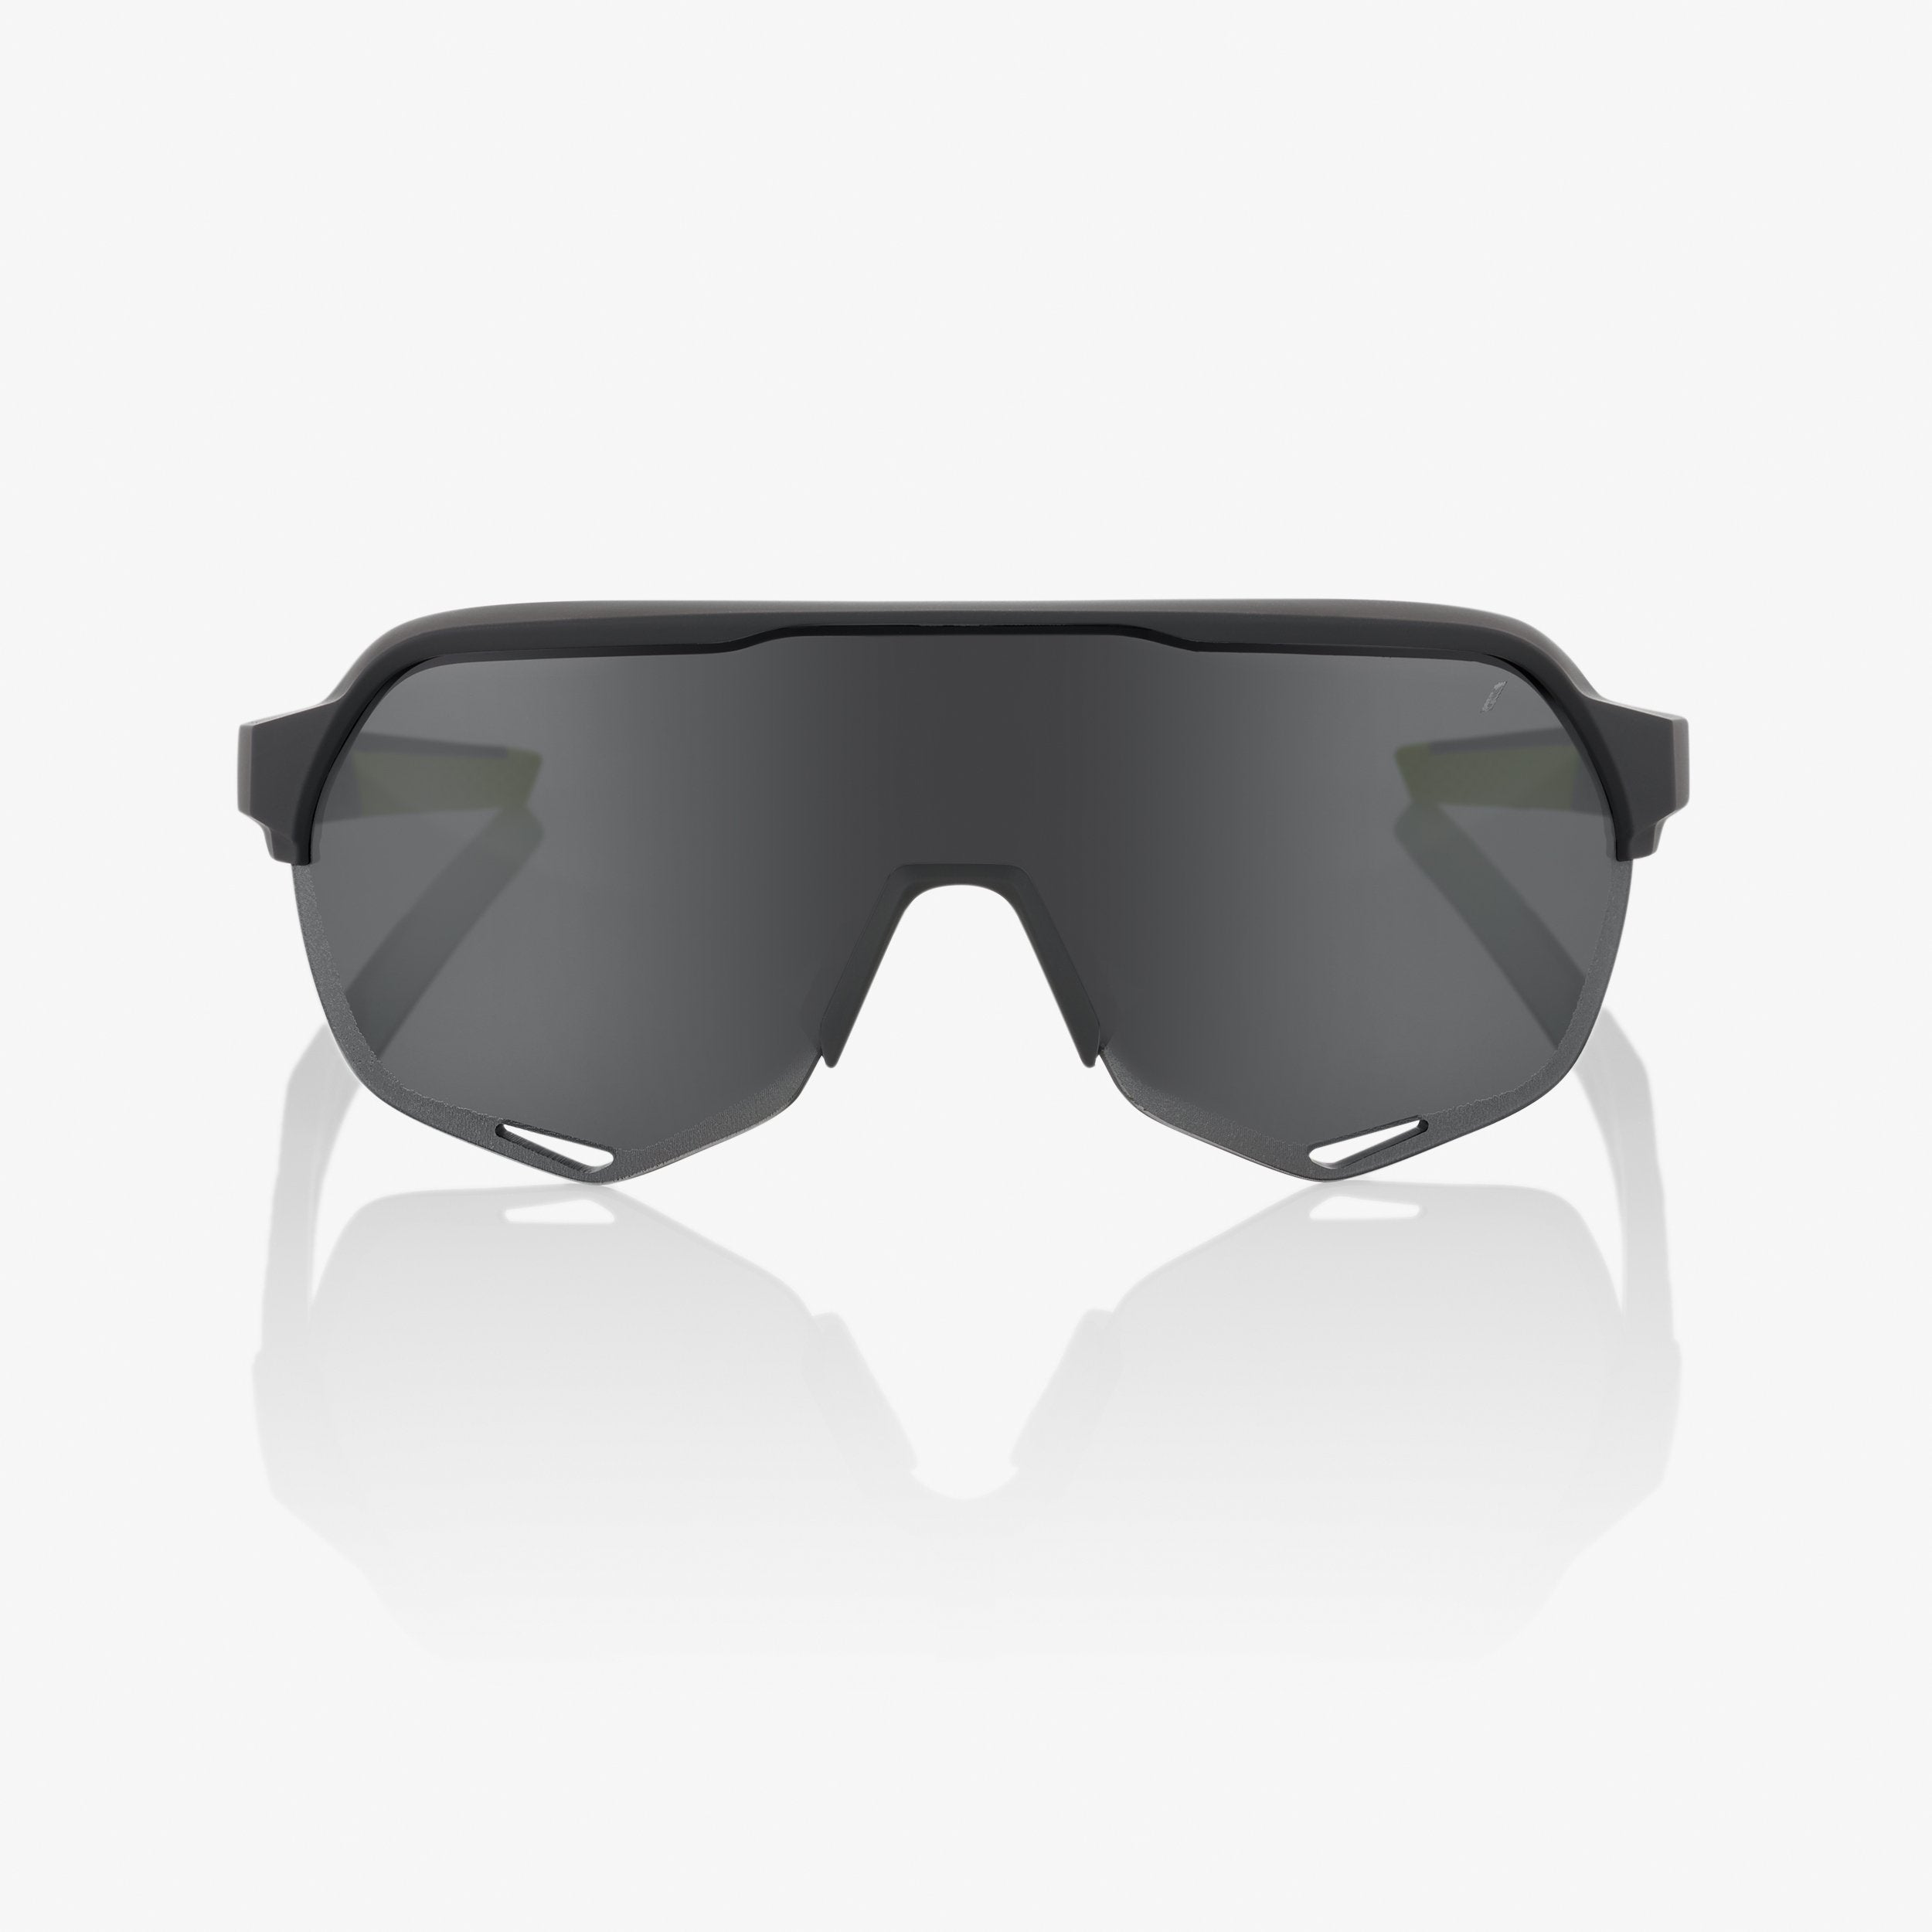 S2 - Soft Tact Cool Grey - Smoke Lens - Secondary